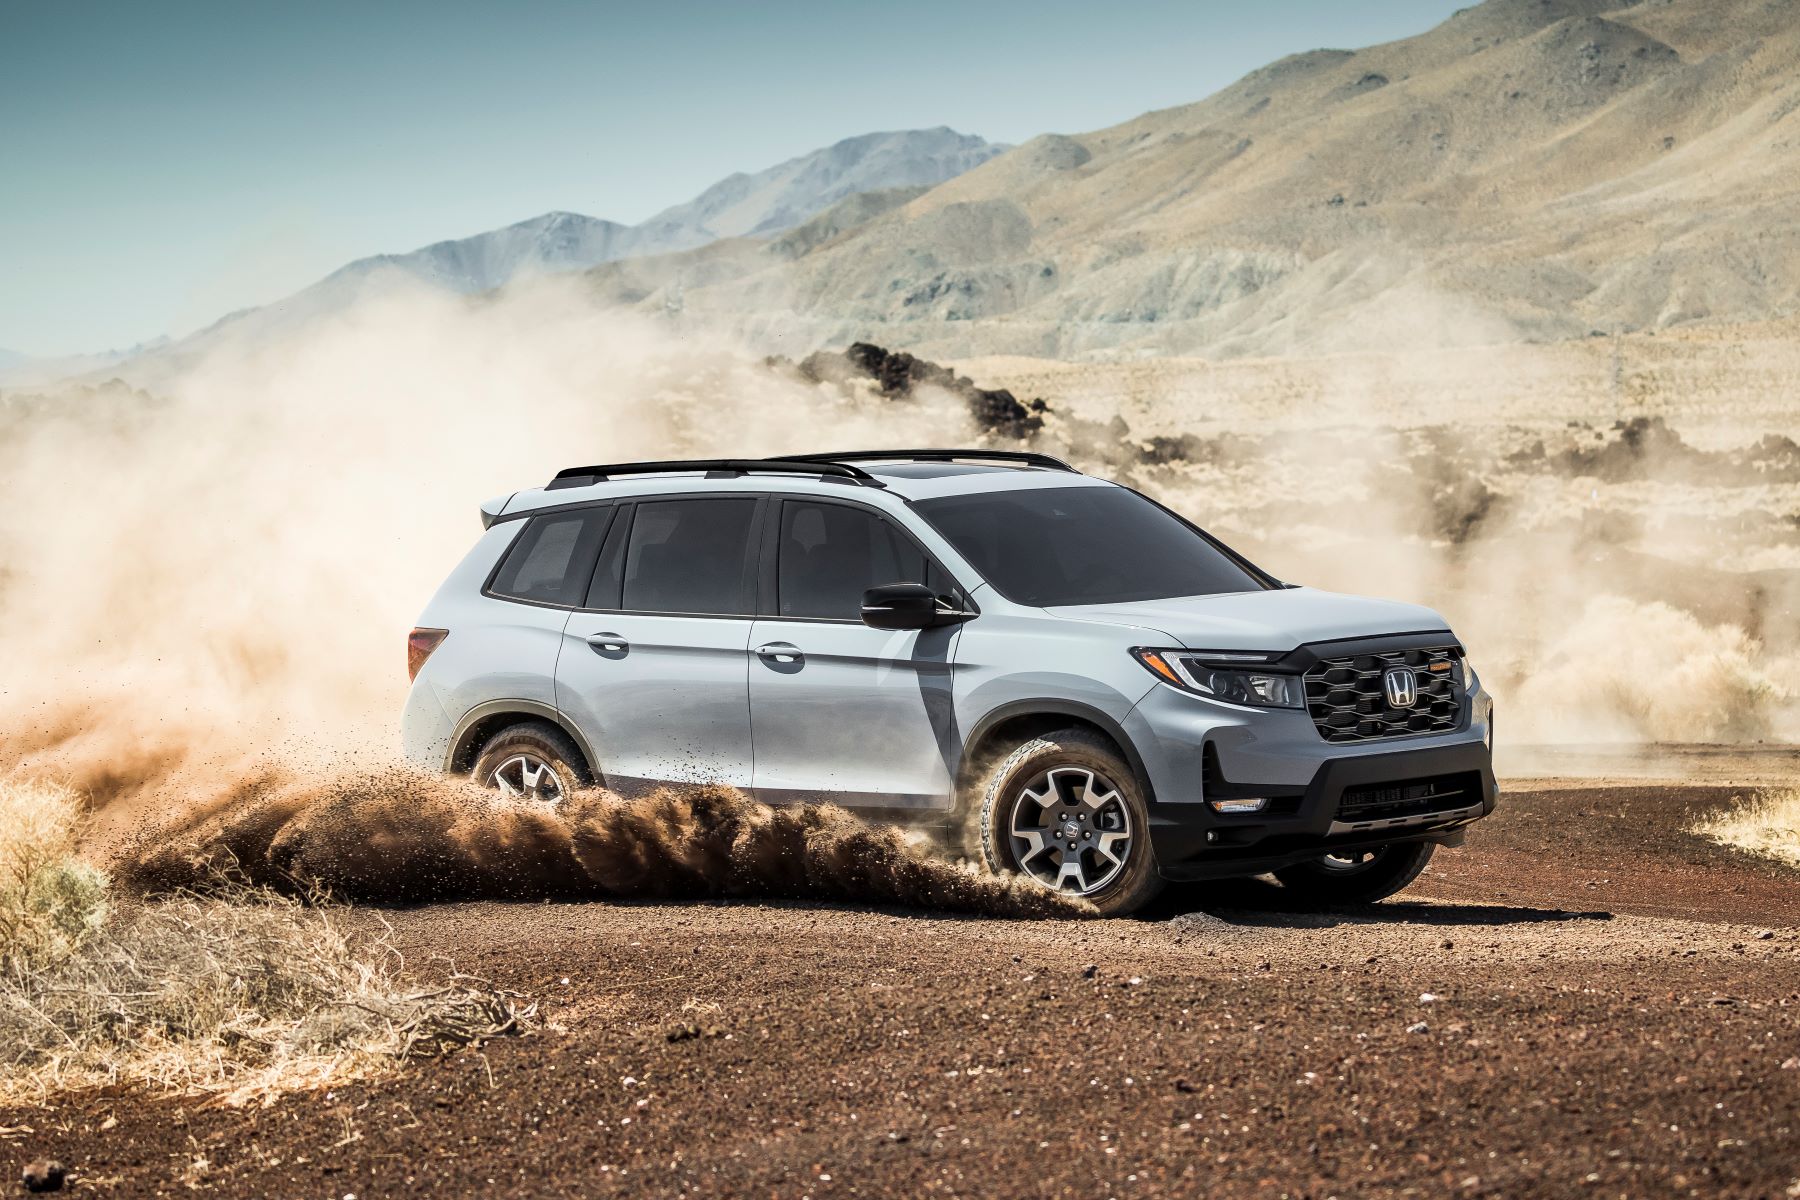 The 2022 Honda Passport TrailSport compact adventure SUV driving through dirt plains in the country